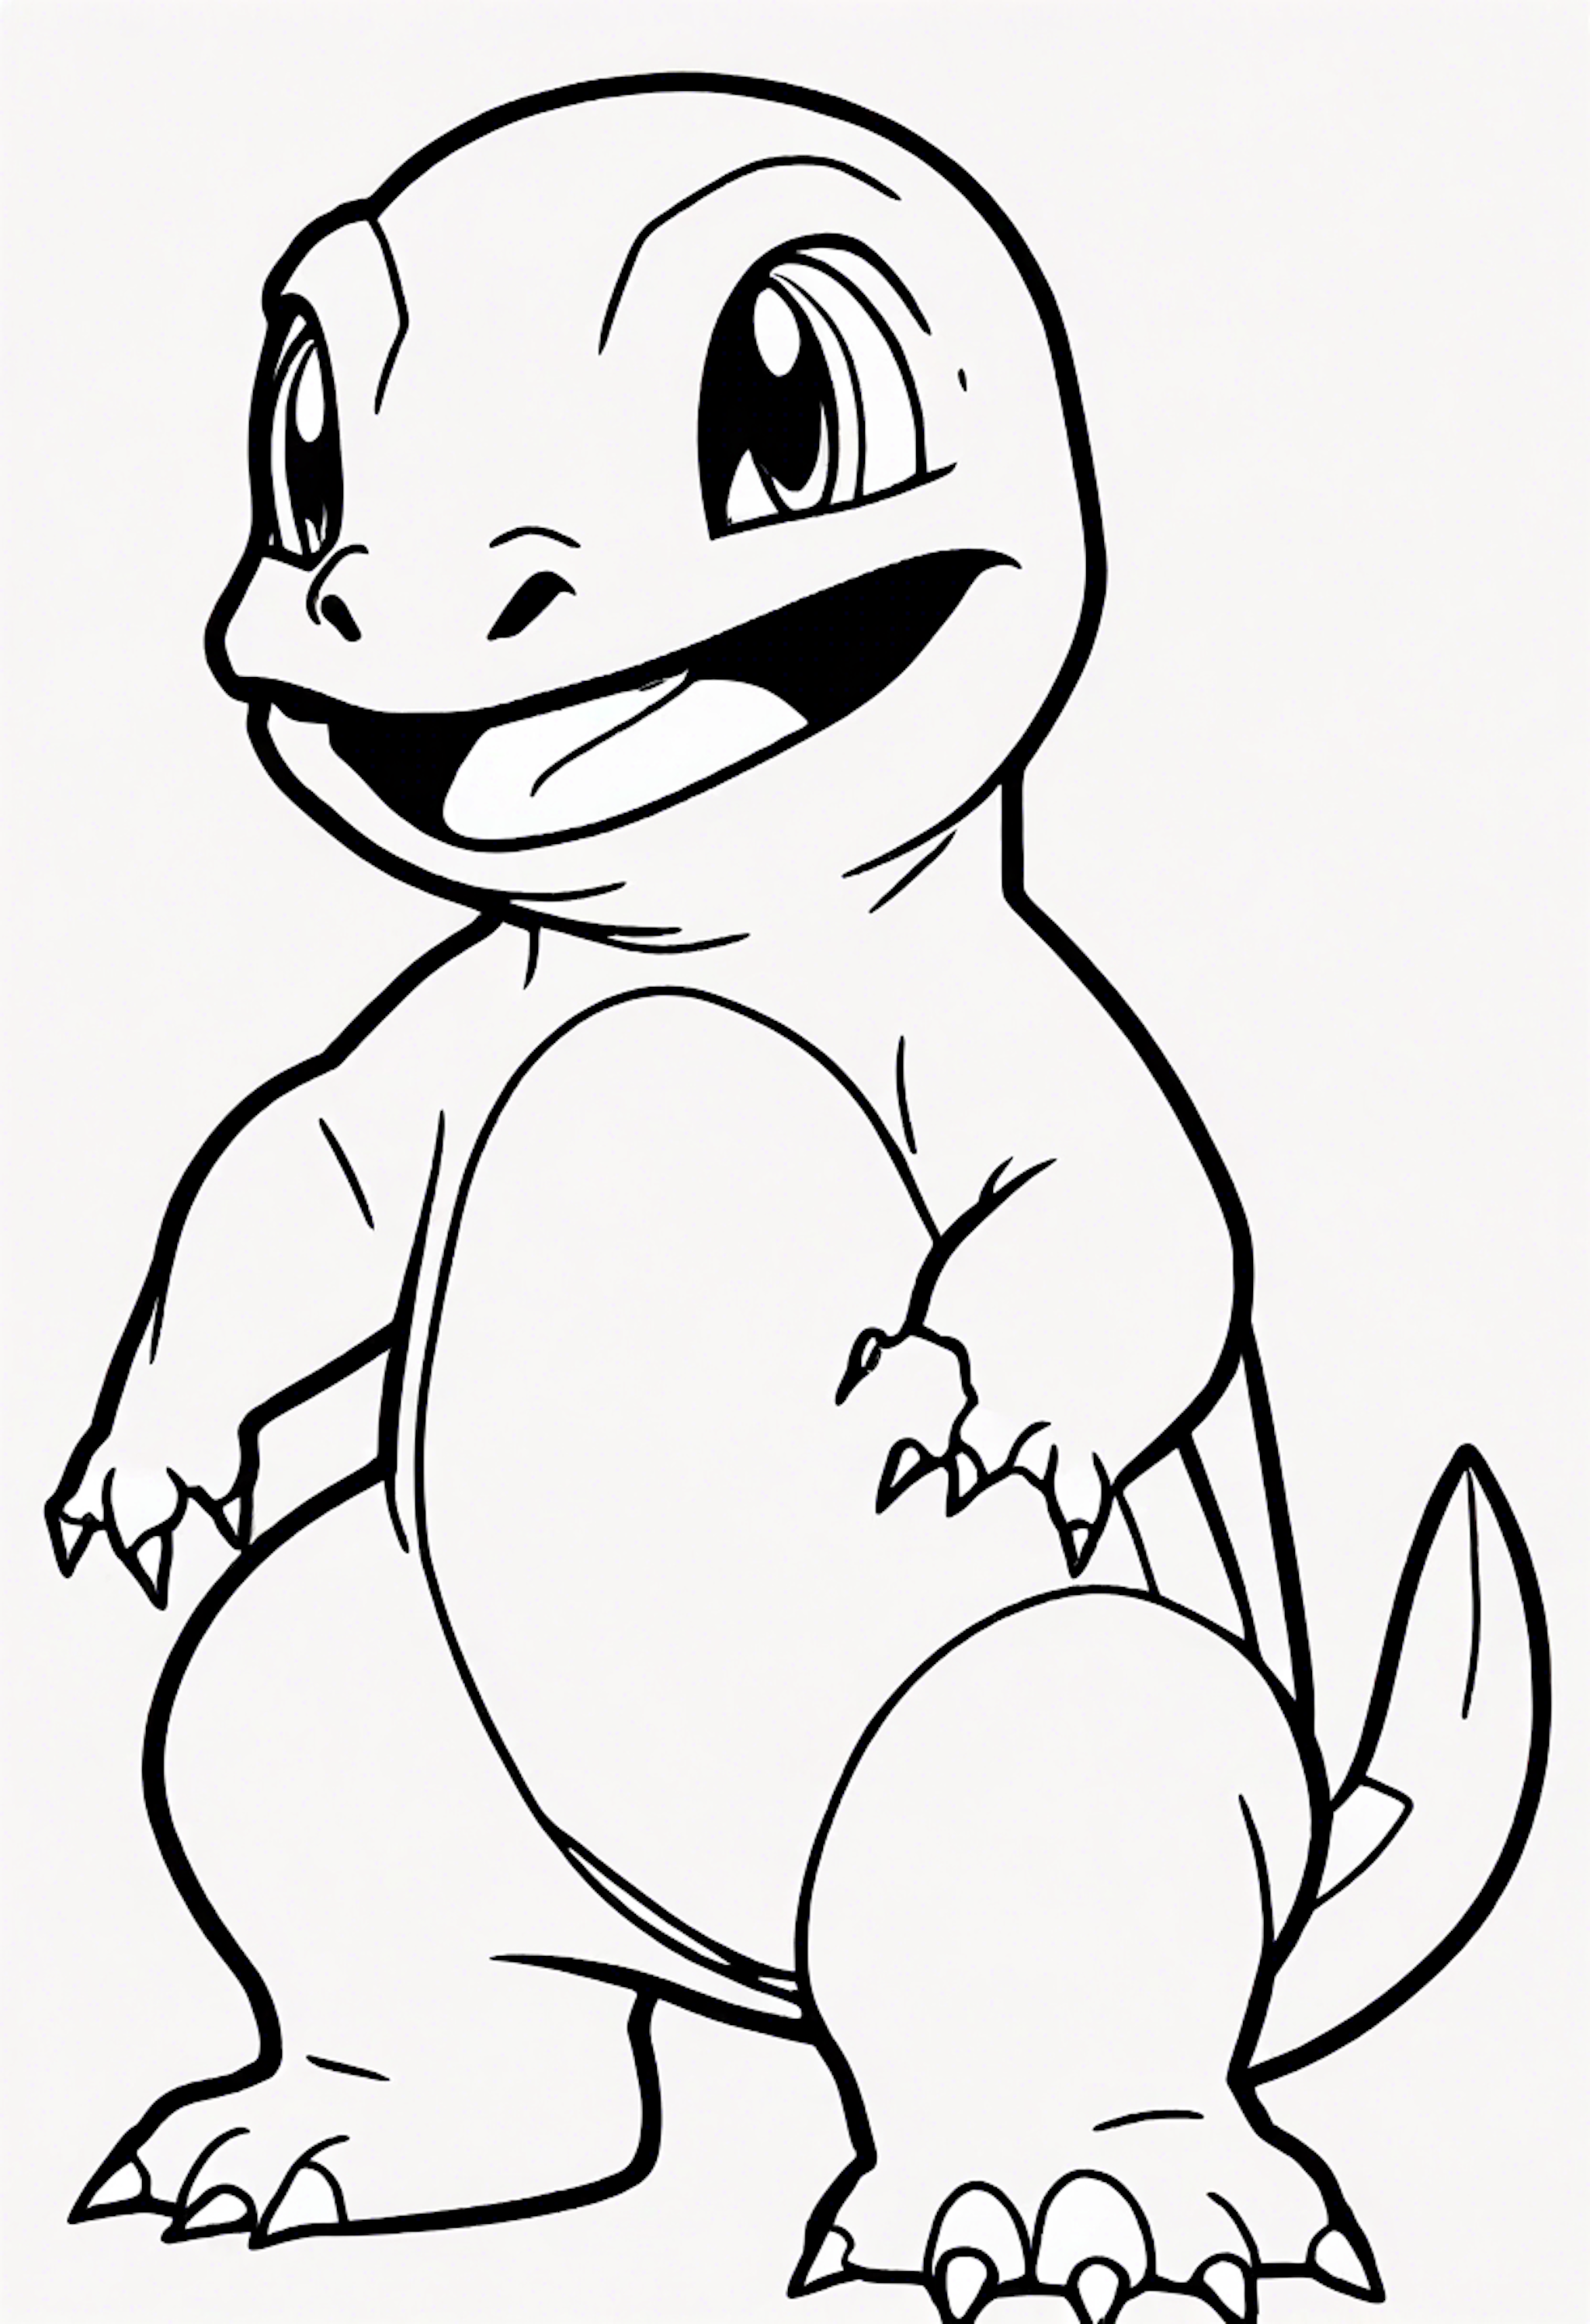 A coloring page for 1 Charmander coloring pages